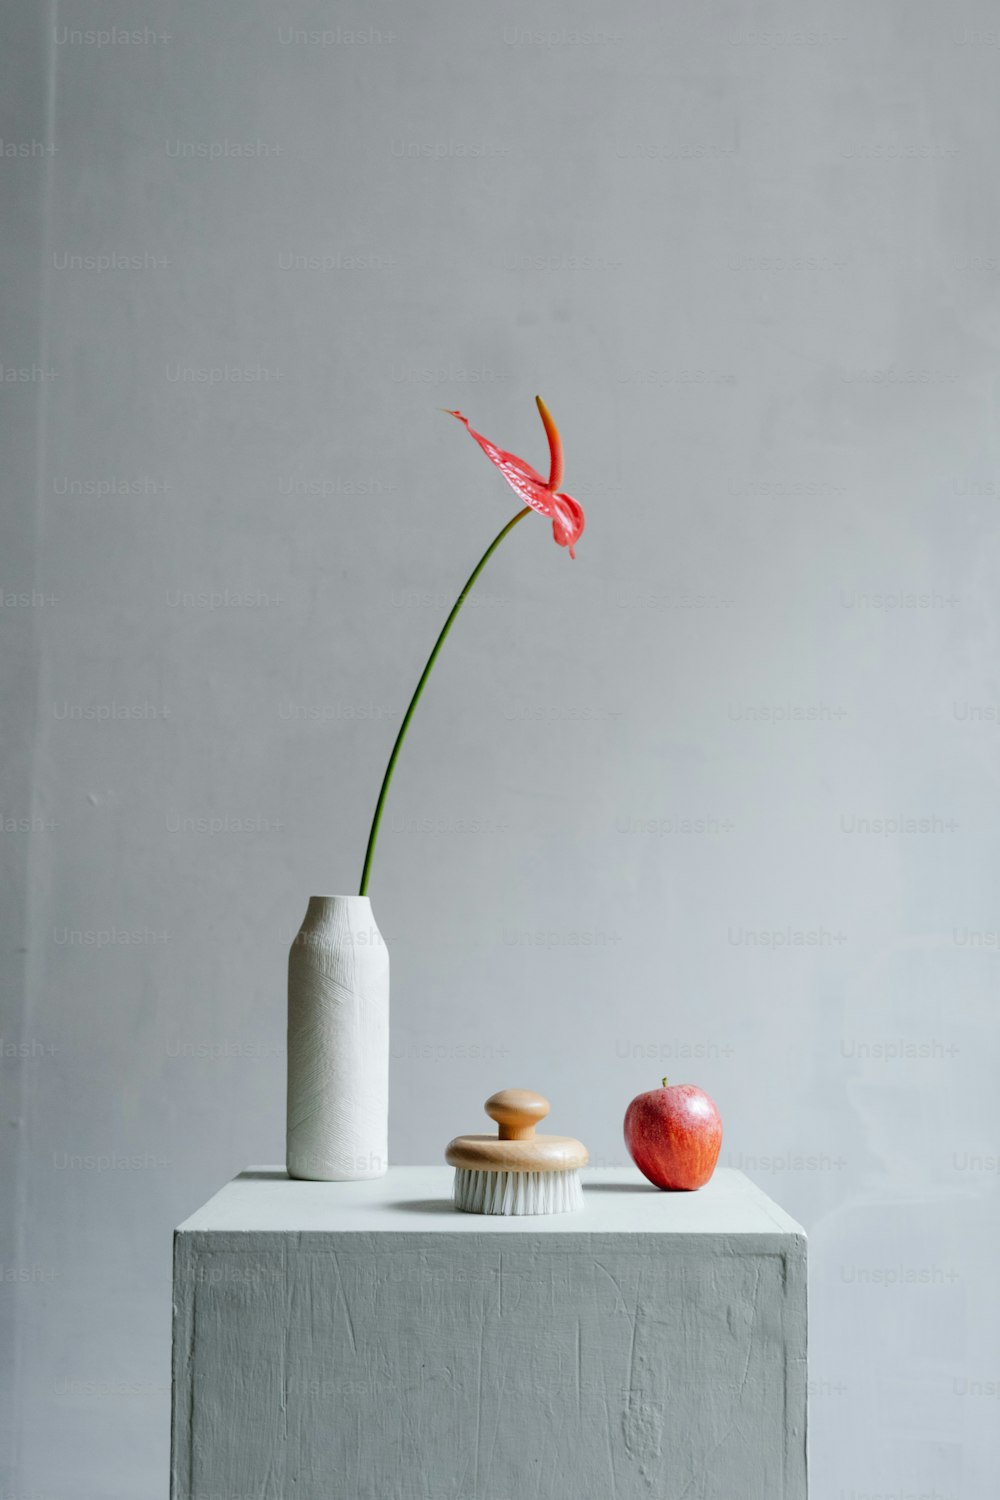 a vase with a flower in it next to an apple